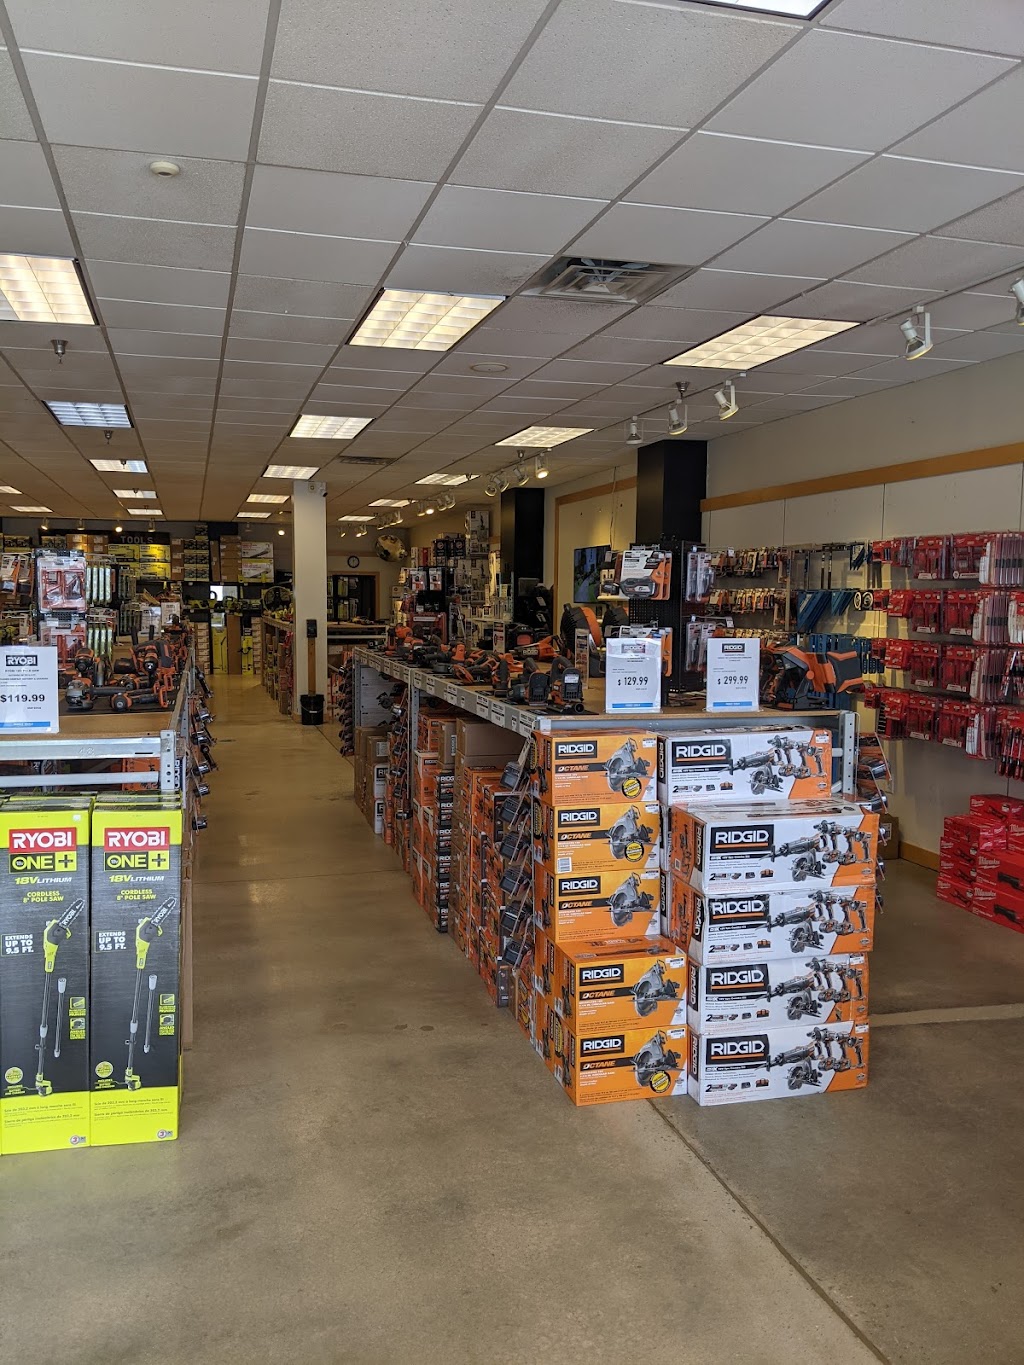 Direct Tools Factory Outlet | Photo 8 of 10 | Address: 1025 Outlet Center Dr #100, Smithfield, NC 27577, USA | Phone: (919) 934-7780